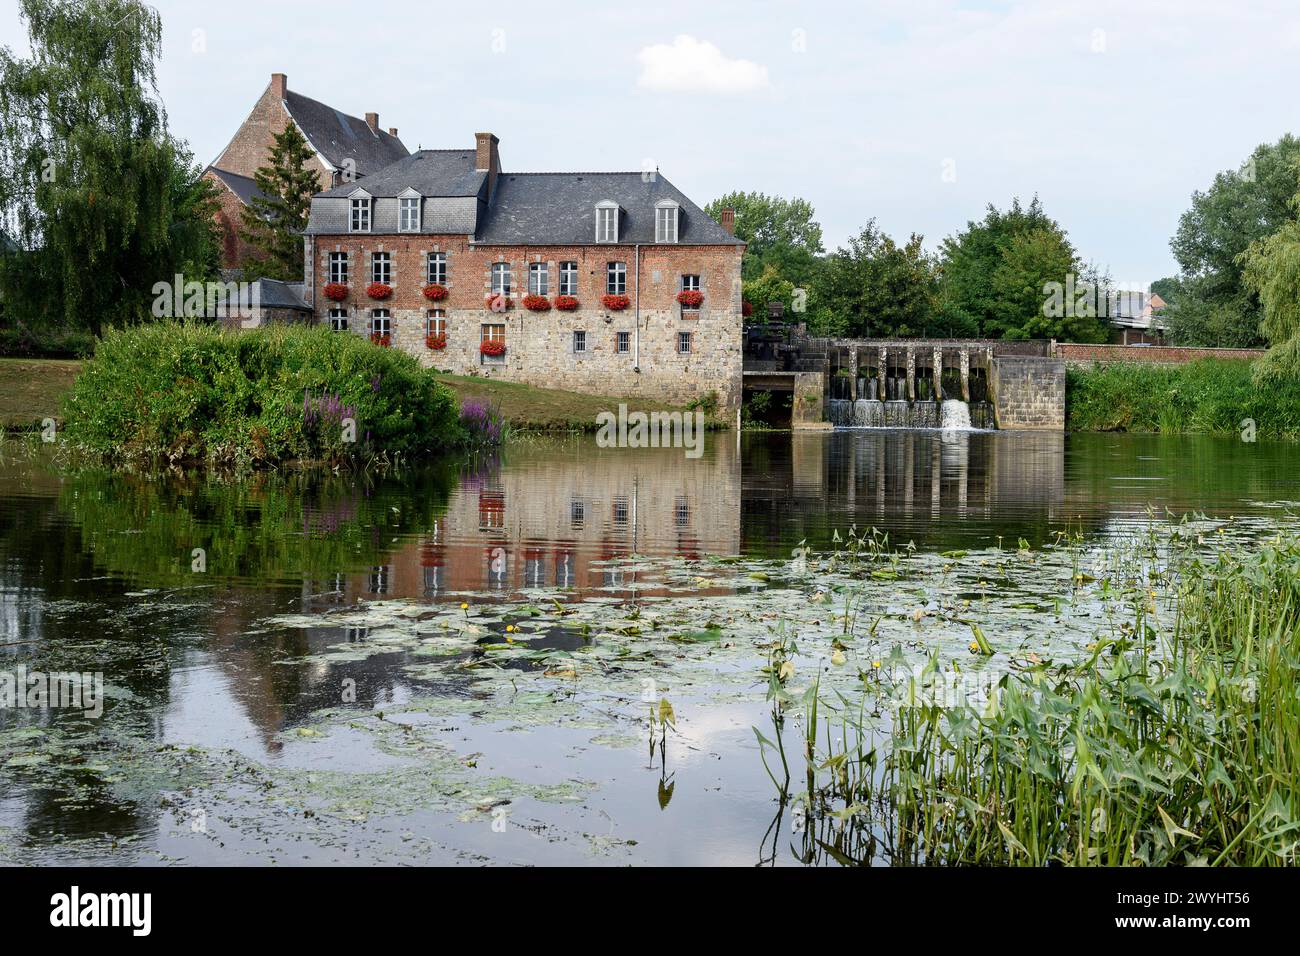 Village de Maroilles dans l'Avesnois. Moulin de l'abbaye |  Maroilles village in the north of France. Watermill of the abbey Stock Photo